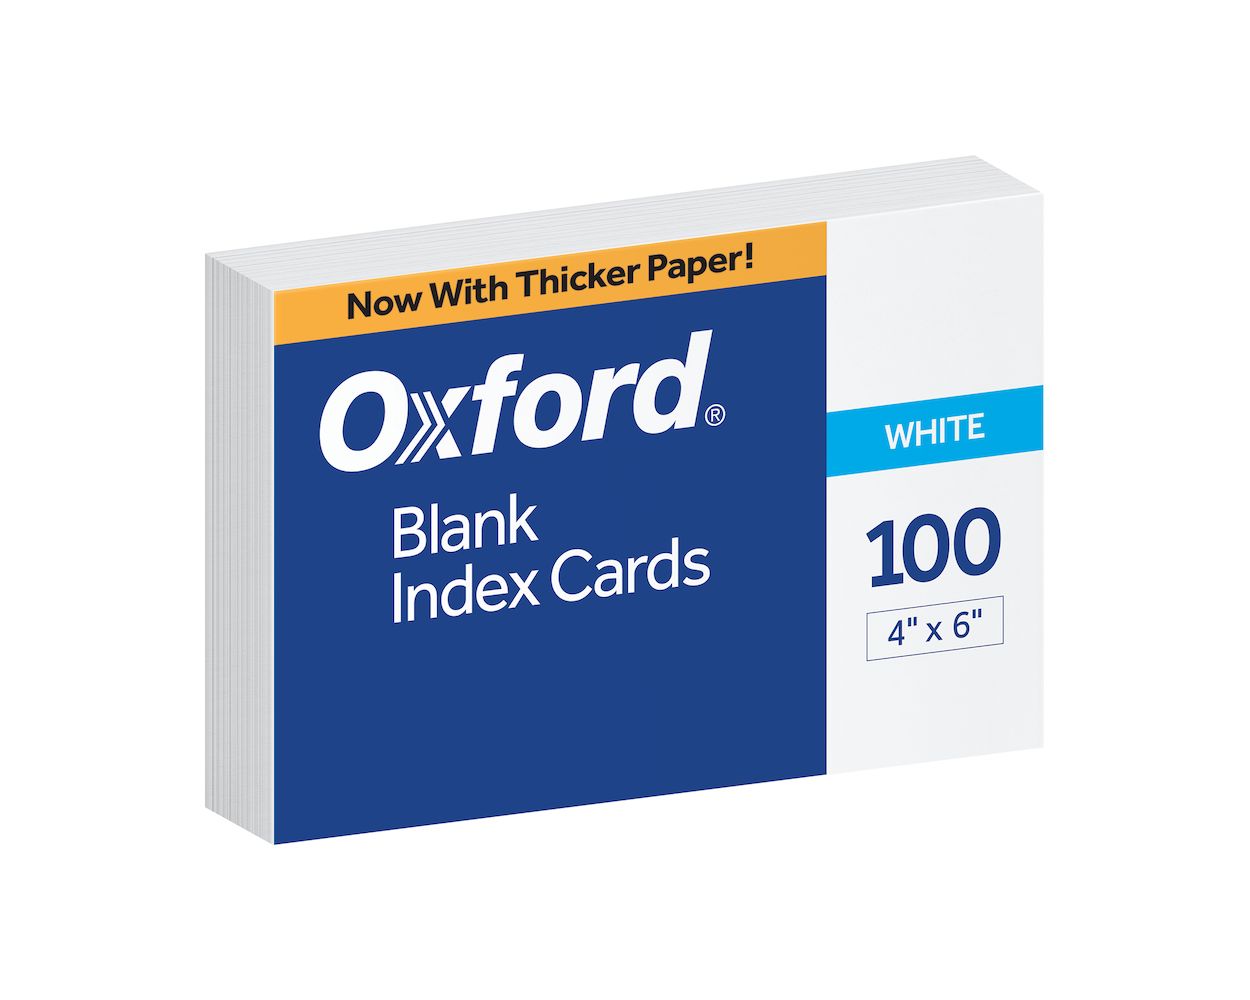 100 Ruled Record Cards 5x3 White Pack of 10